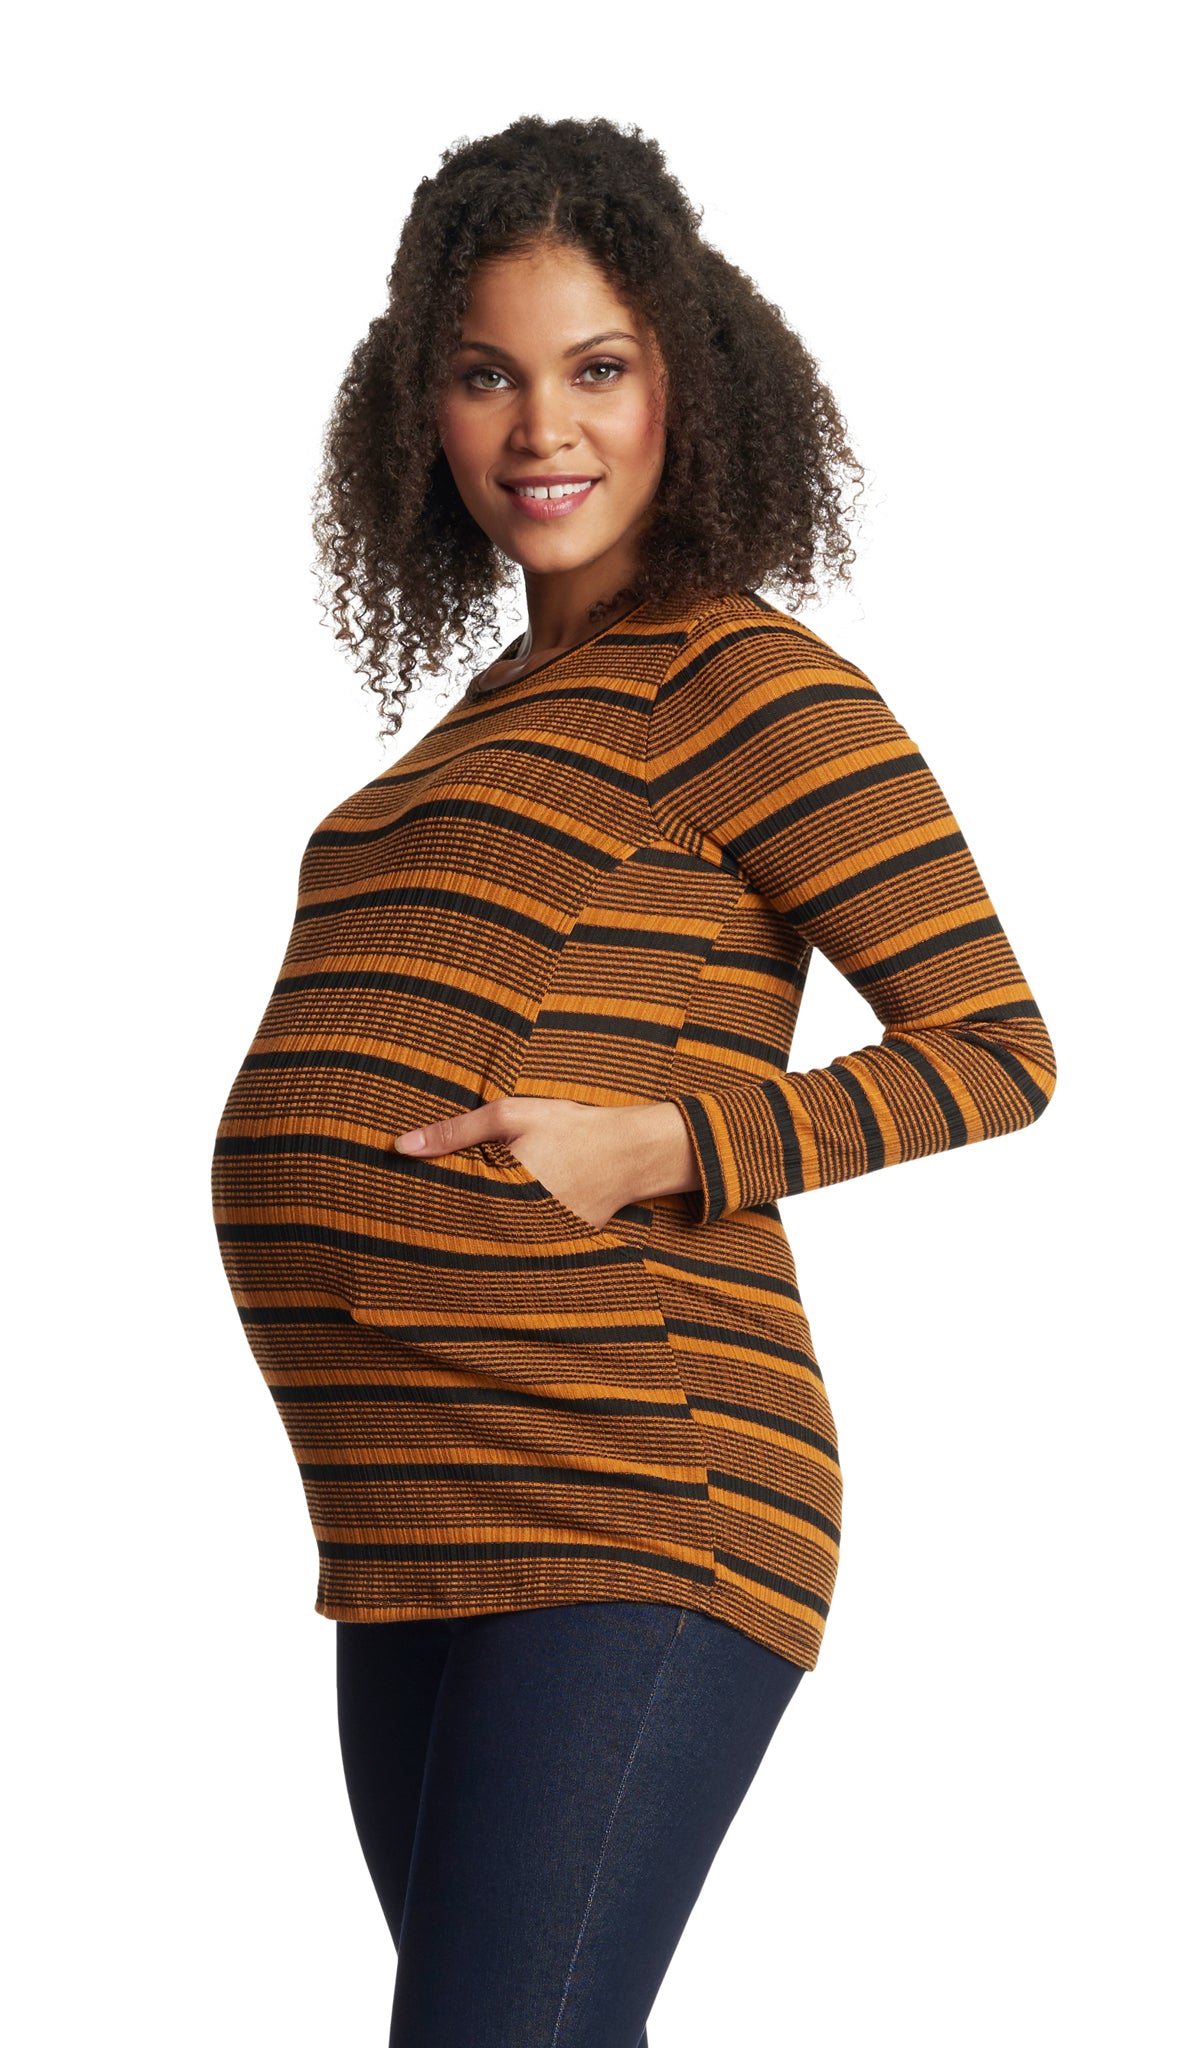 Mustard Stripe Ashley sweater worn by pregnant woman with one hand on side nursing opening for "pocket" effect.